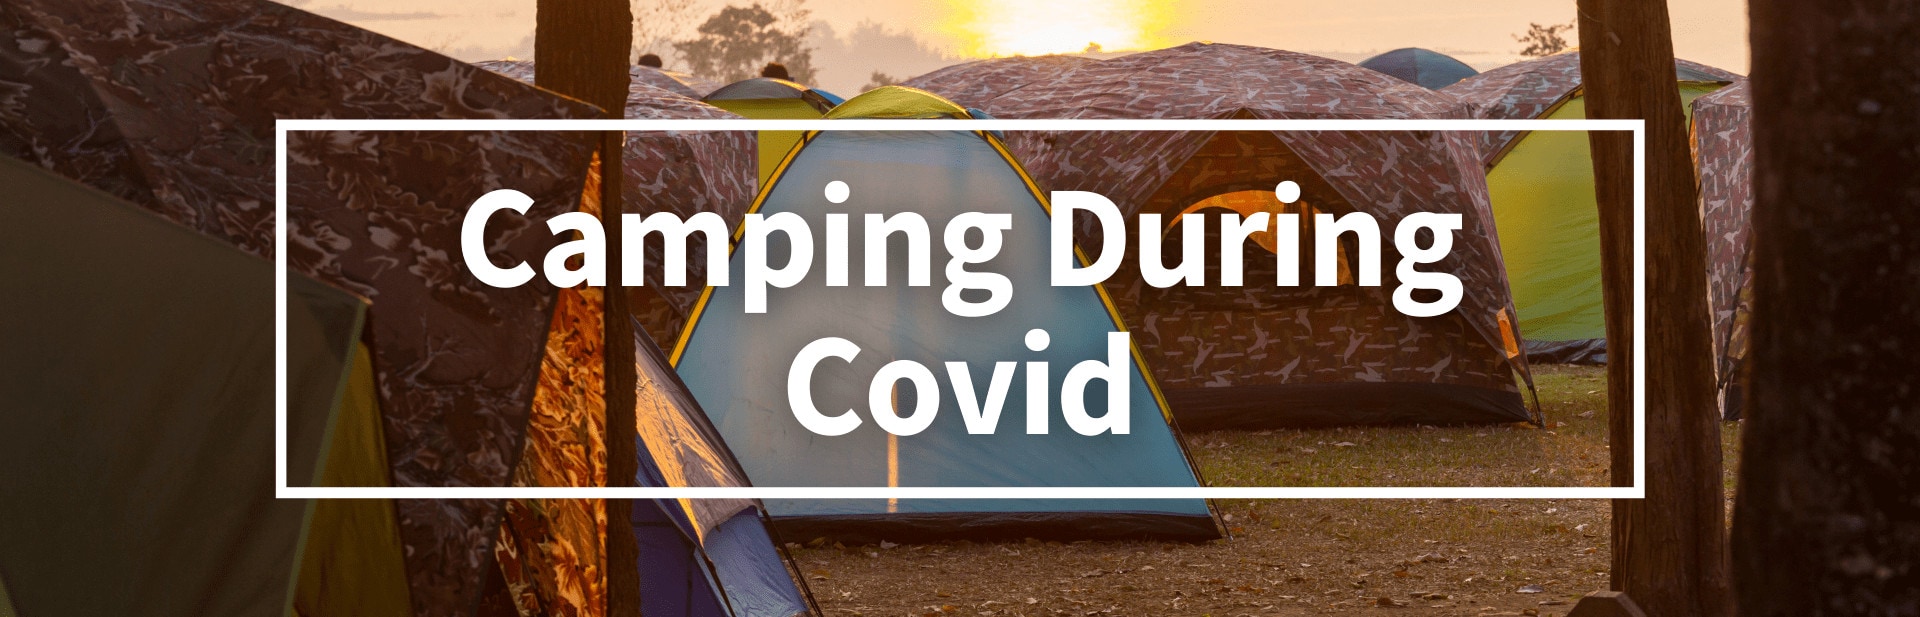 Where To Go Camping During Covid?